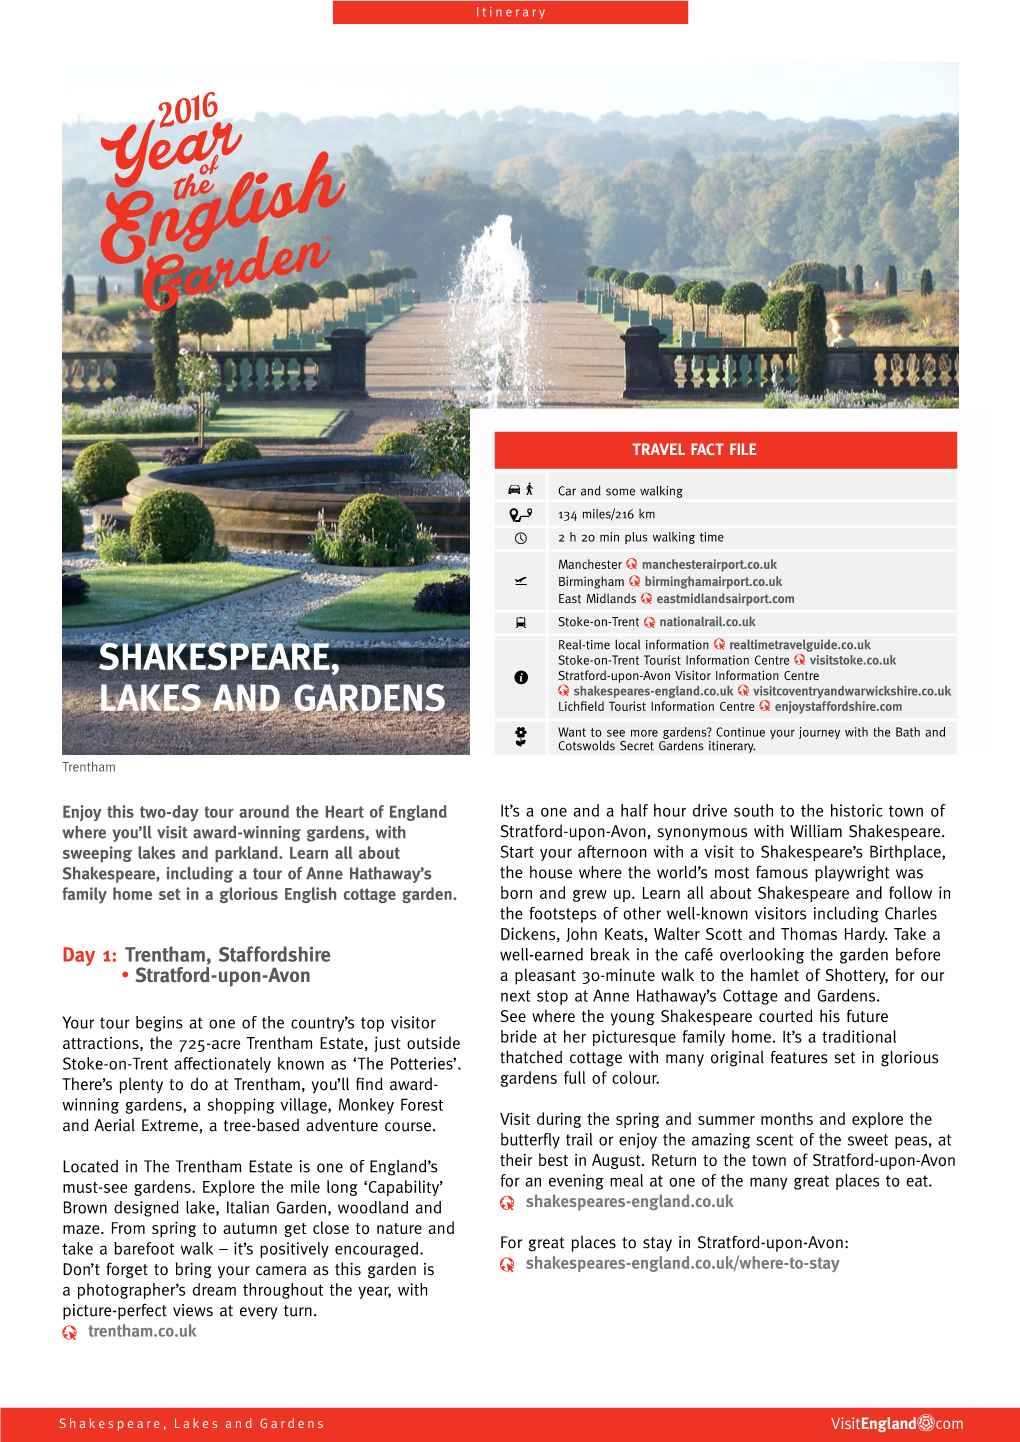 Shakespeare, Lakes and Gardens Itinerary